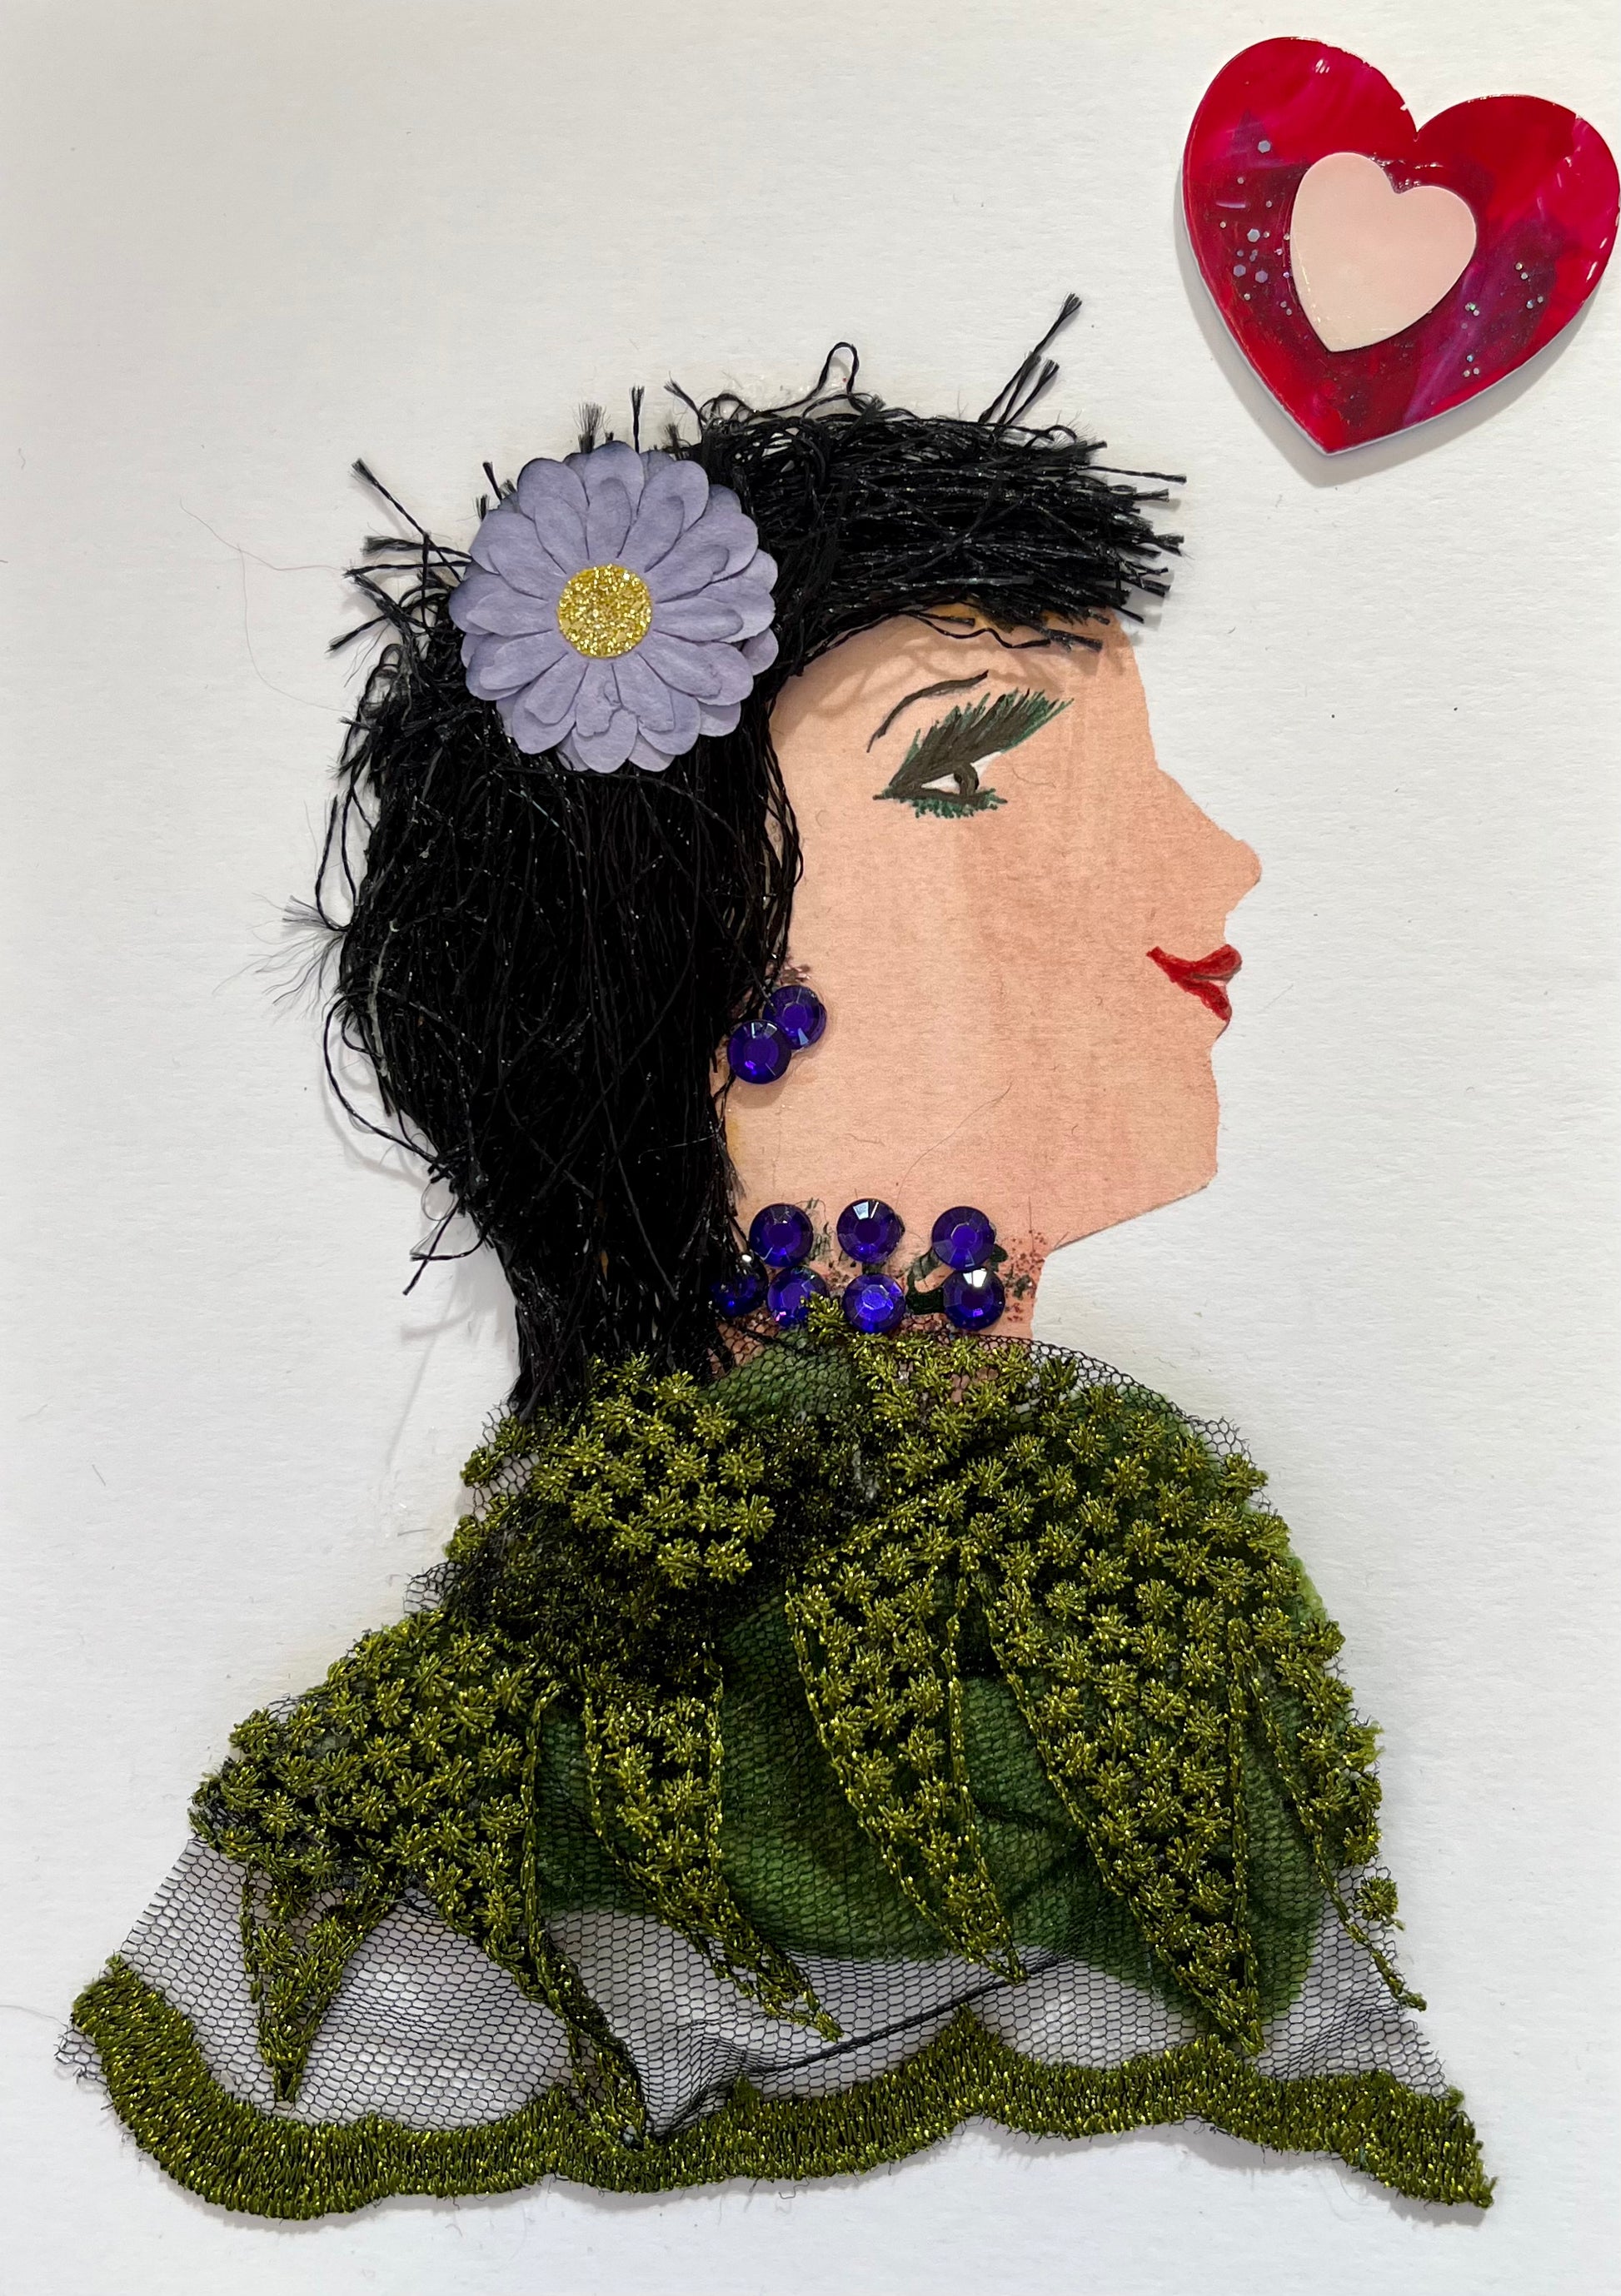 This card has been given the name Mish. Mish wears an olive green lace blouse, purple gem jewellery, and a purple flower with a gold center in her black hair. In the top right corner, there is a red heart. 